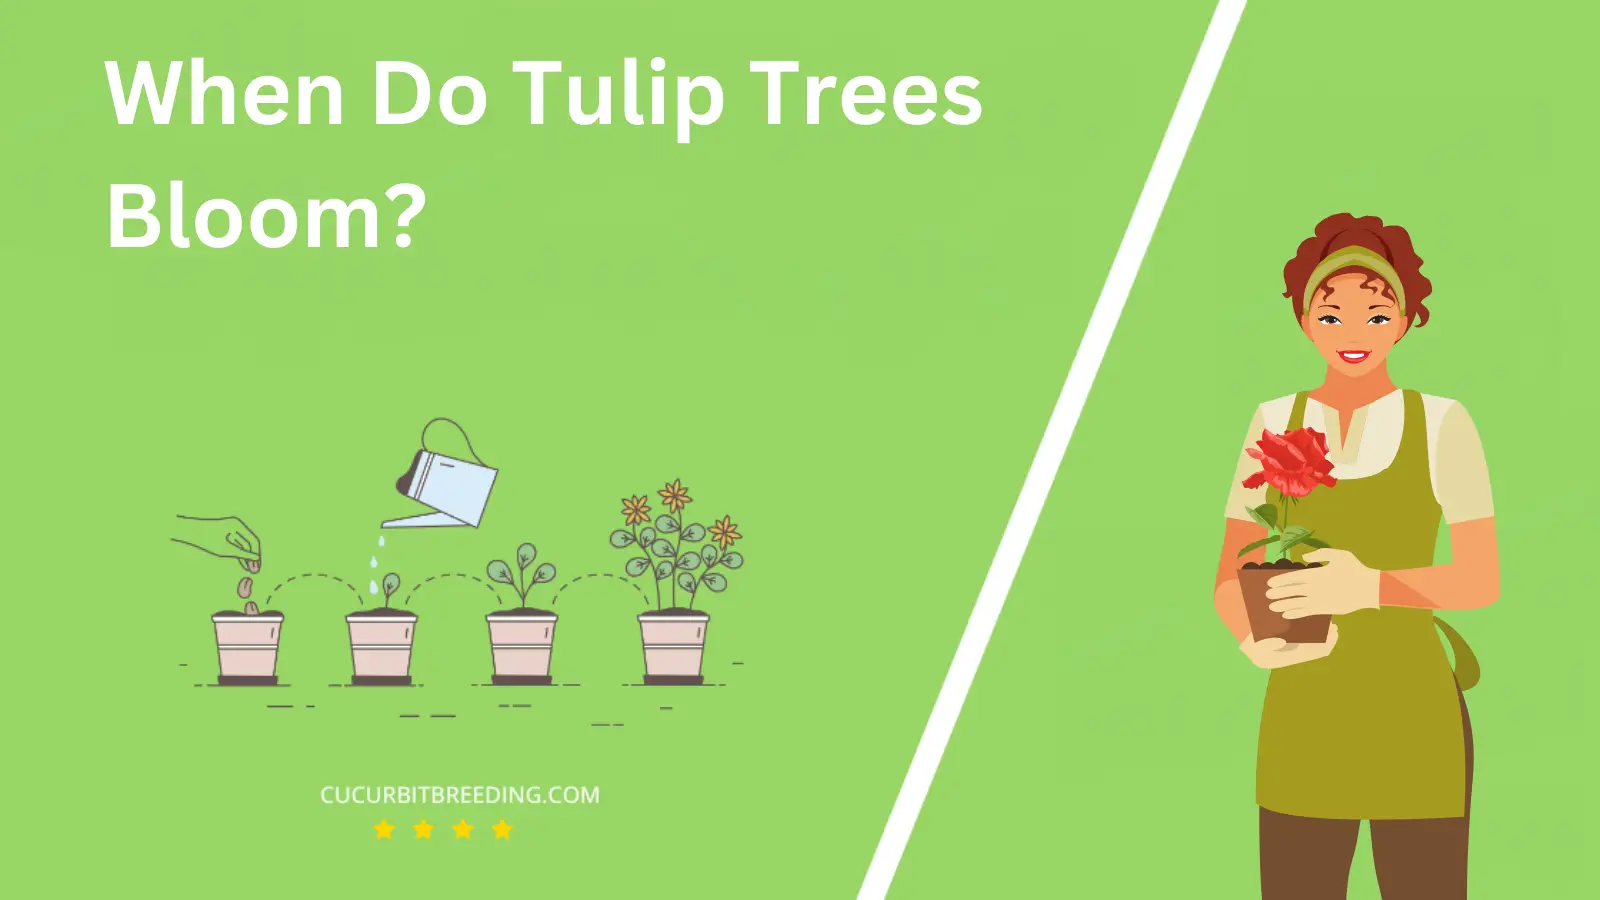 When Do Tulip Trees Bloom?